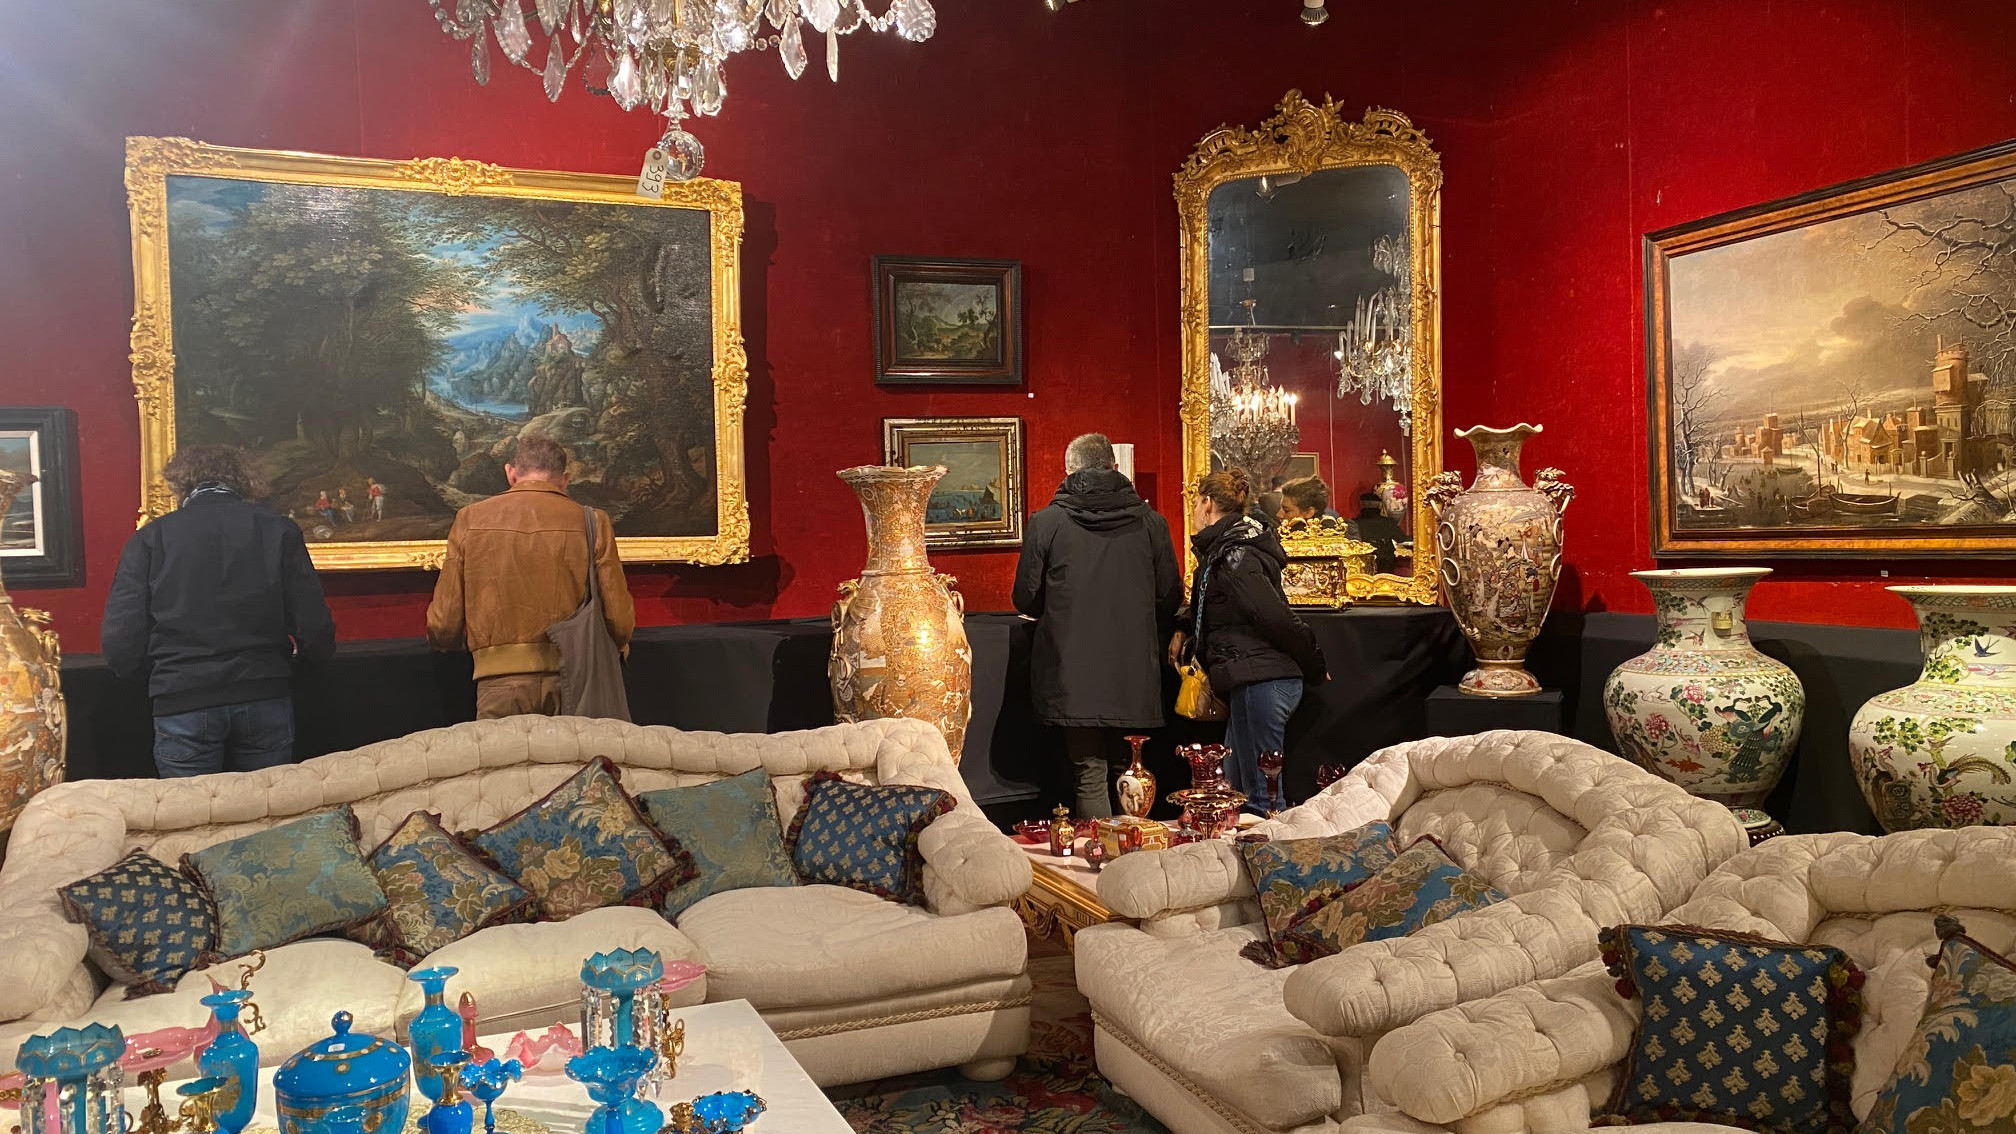 Among the items auctioned by Ader were luxurious sofas, tables, paintings, chandeliers, porcelain dinner sets and rugs. (Céline Martelet/Middle East Eye)